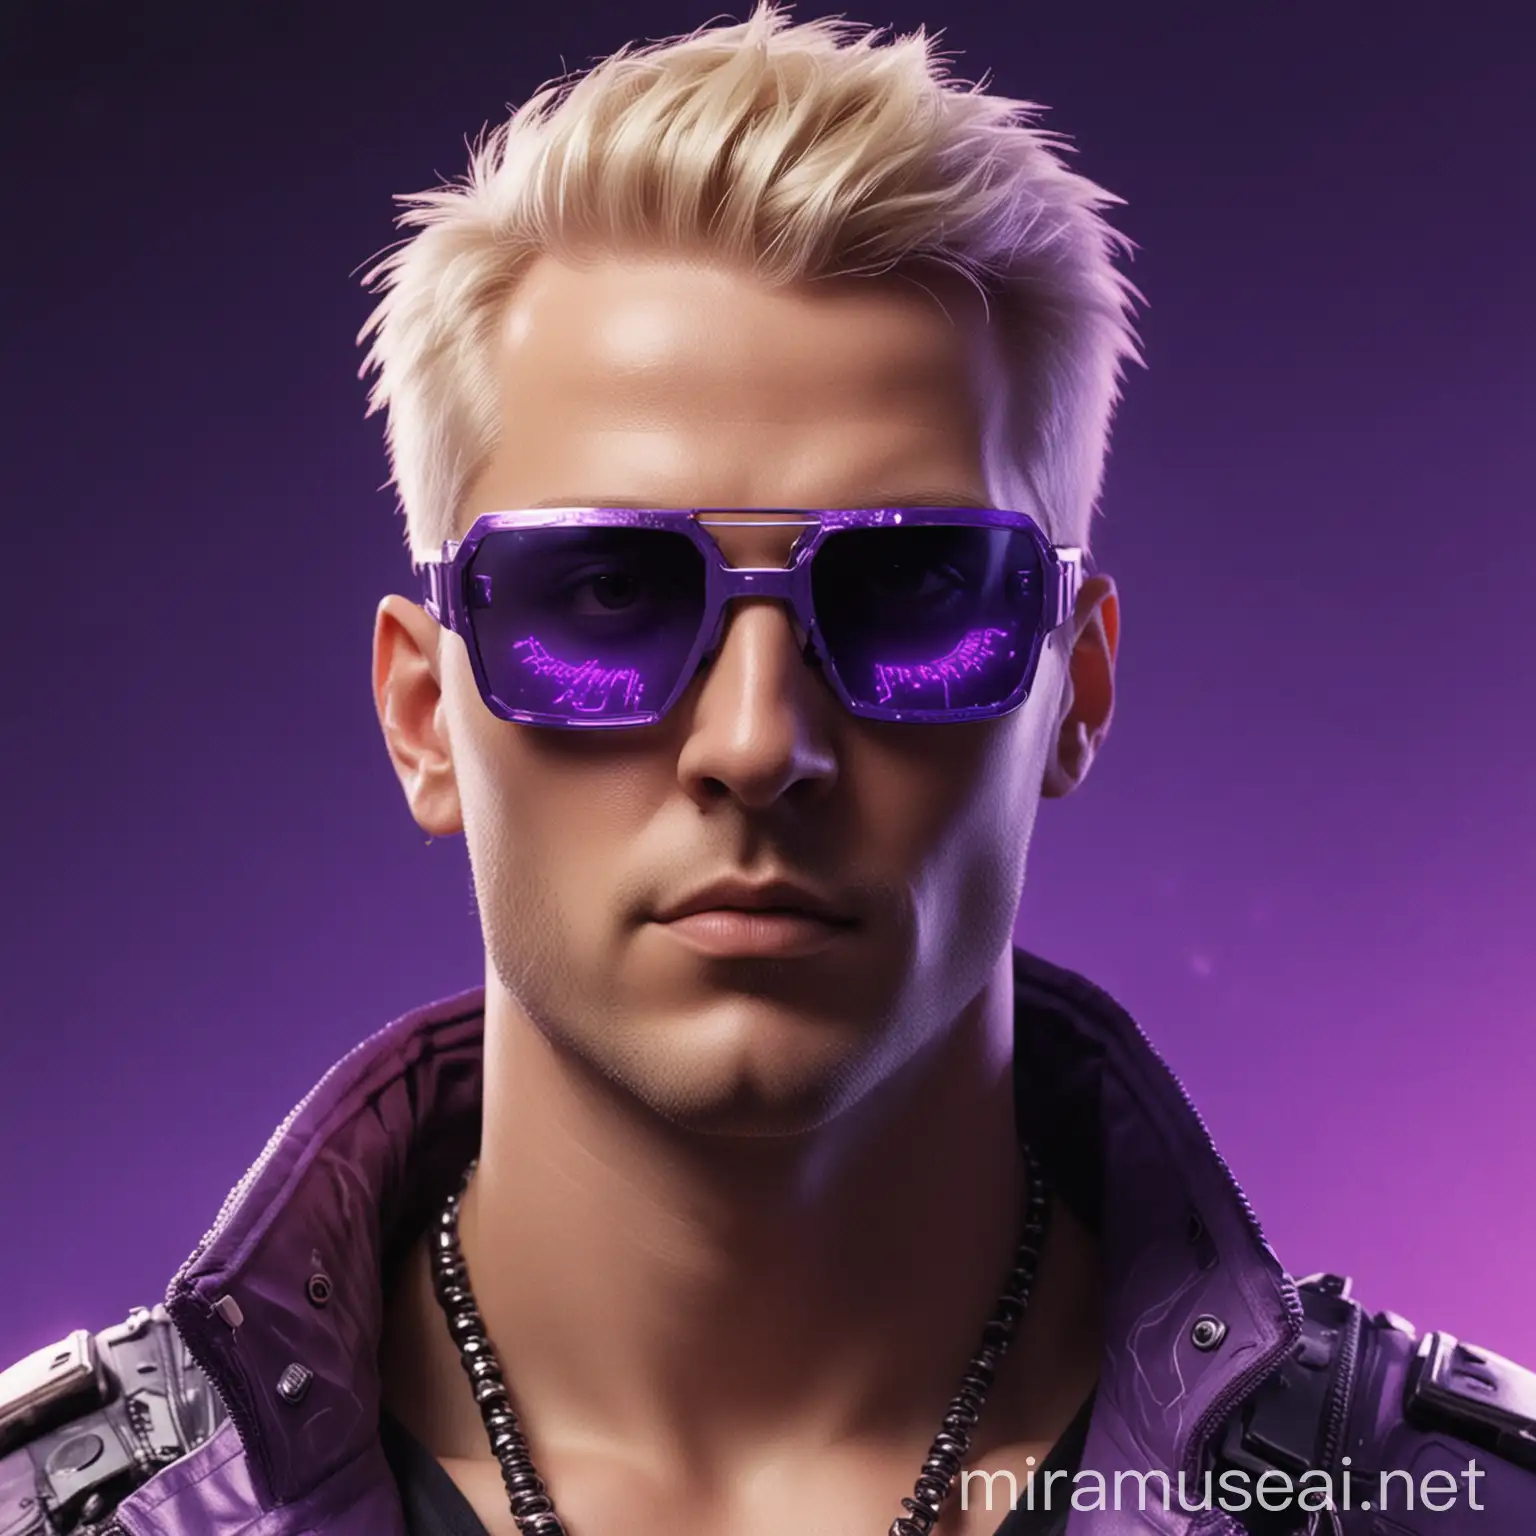 Blonde White Man in Cyberpunk NFT with Purple Theme and Sunglasses